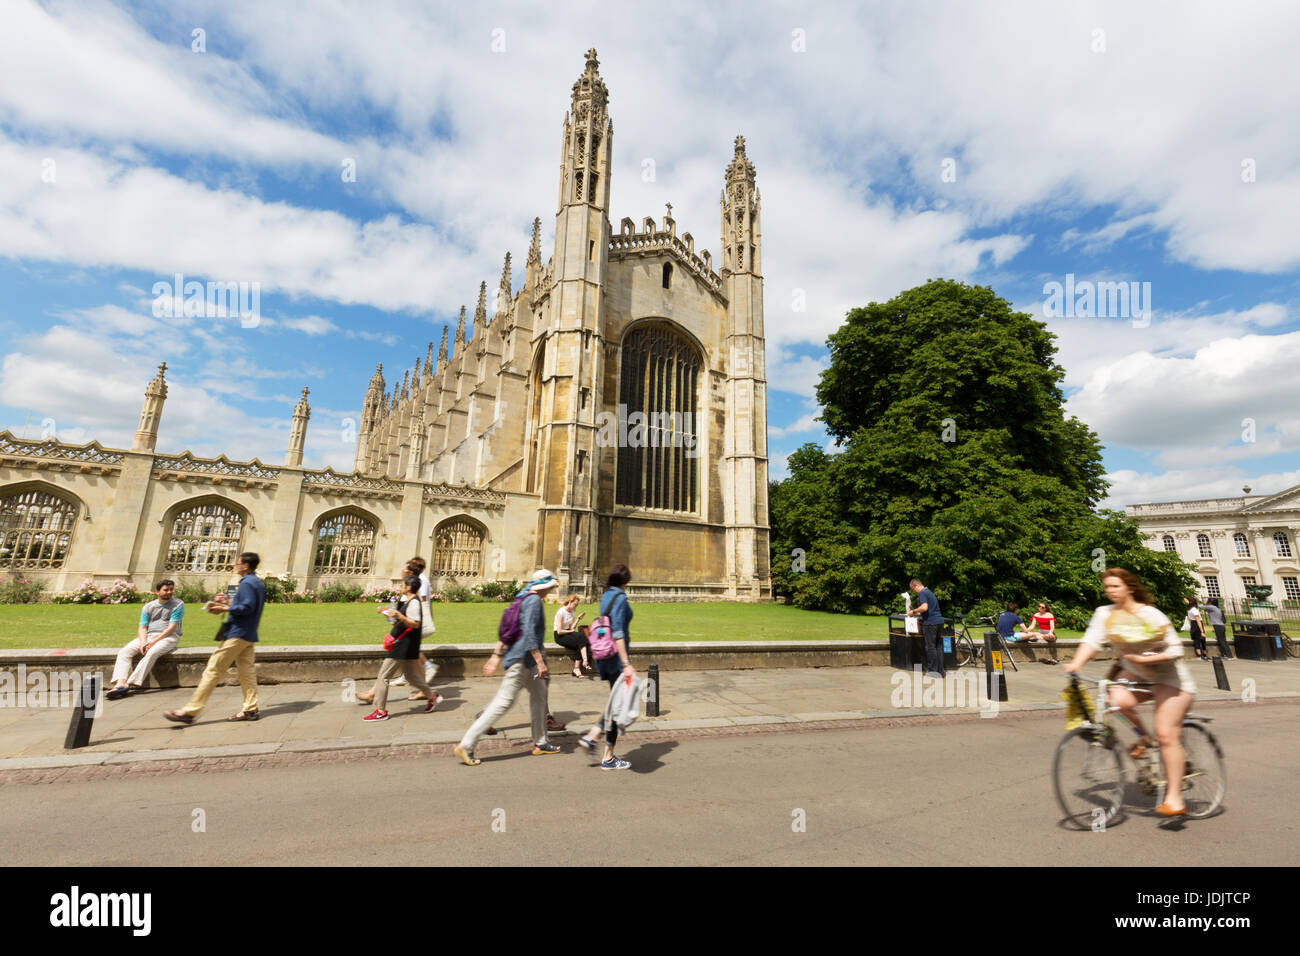 Student on a bicycle; Kings College Chapel, Kings Parade Cambridge city centre, Cambridge England UK Stock Photo